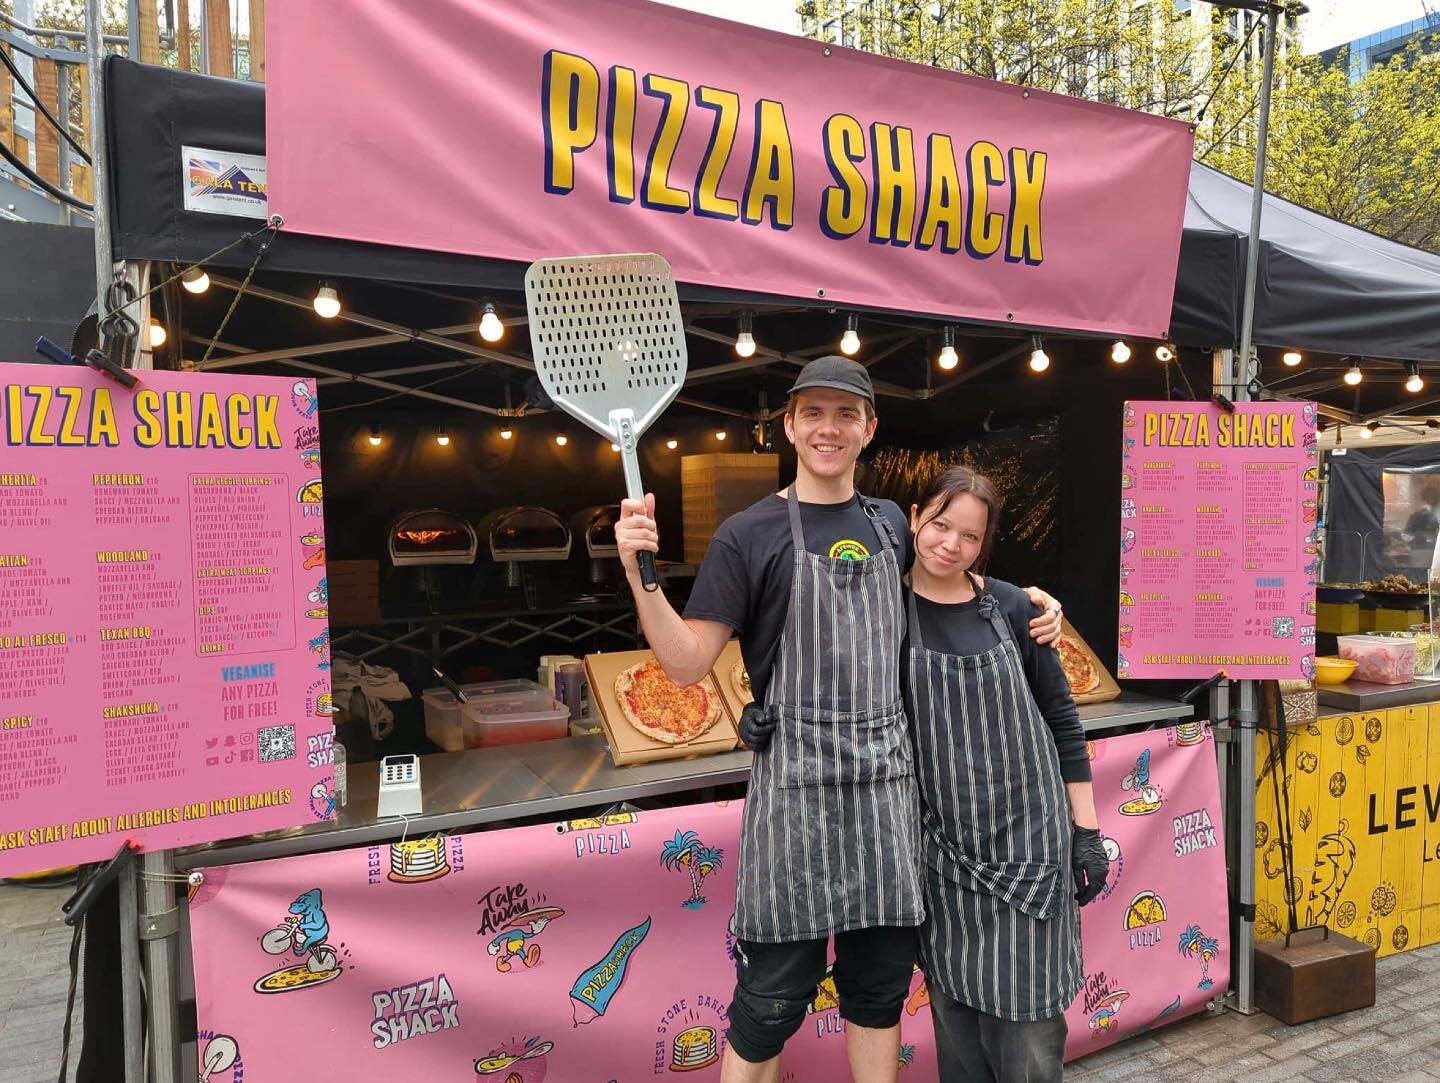 Catch us throwing dough wheels and baking epic pizza pies 🍕 all weekend long @scfoodmarket! We&rsquo;ve got all your favourites- succulent pepperoni, bbq bases, melting mozzarella, and all the sweet and spicy toppings you could wish for 🤞🙏🤤

📍 F